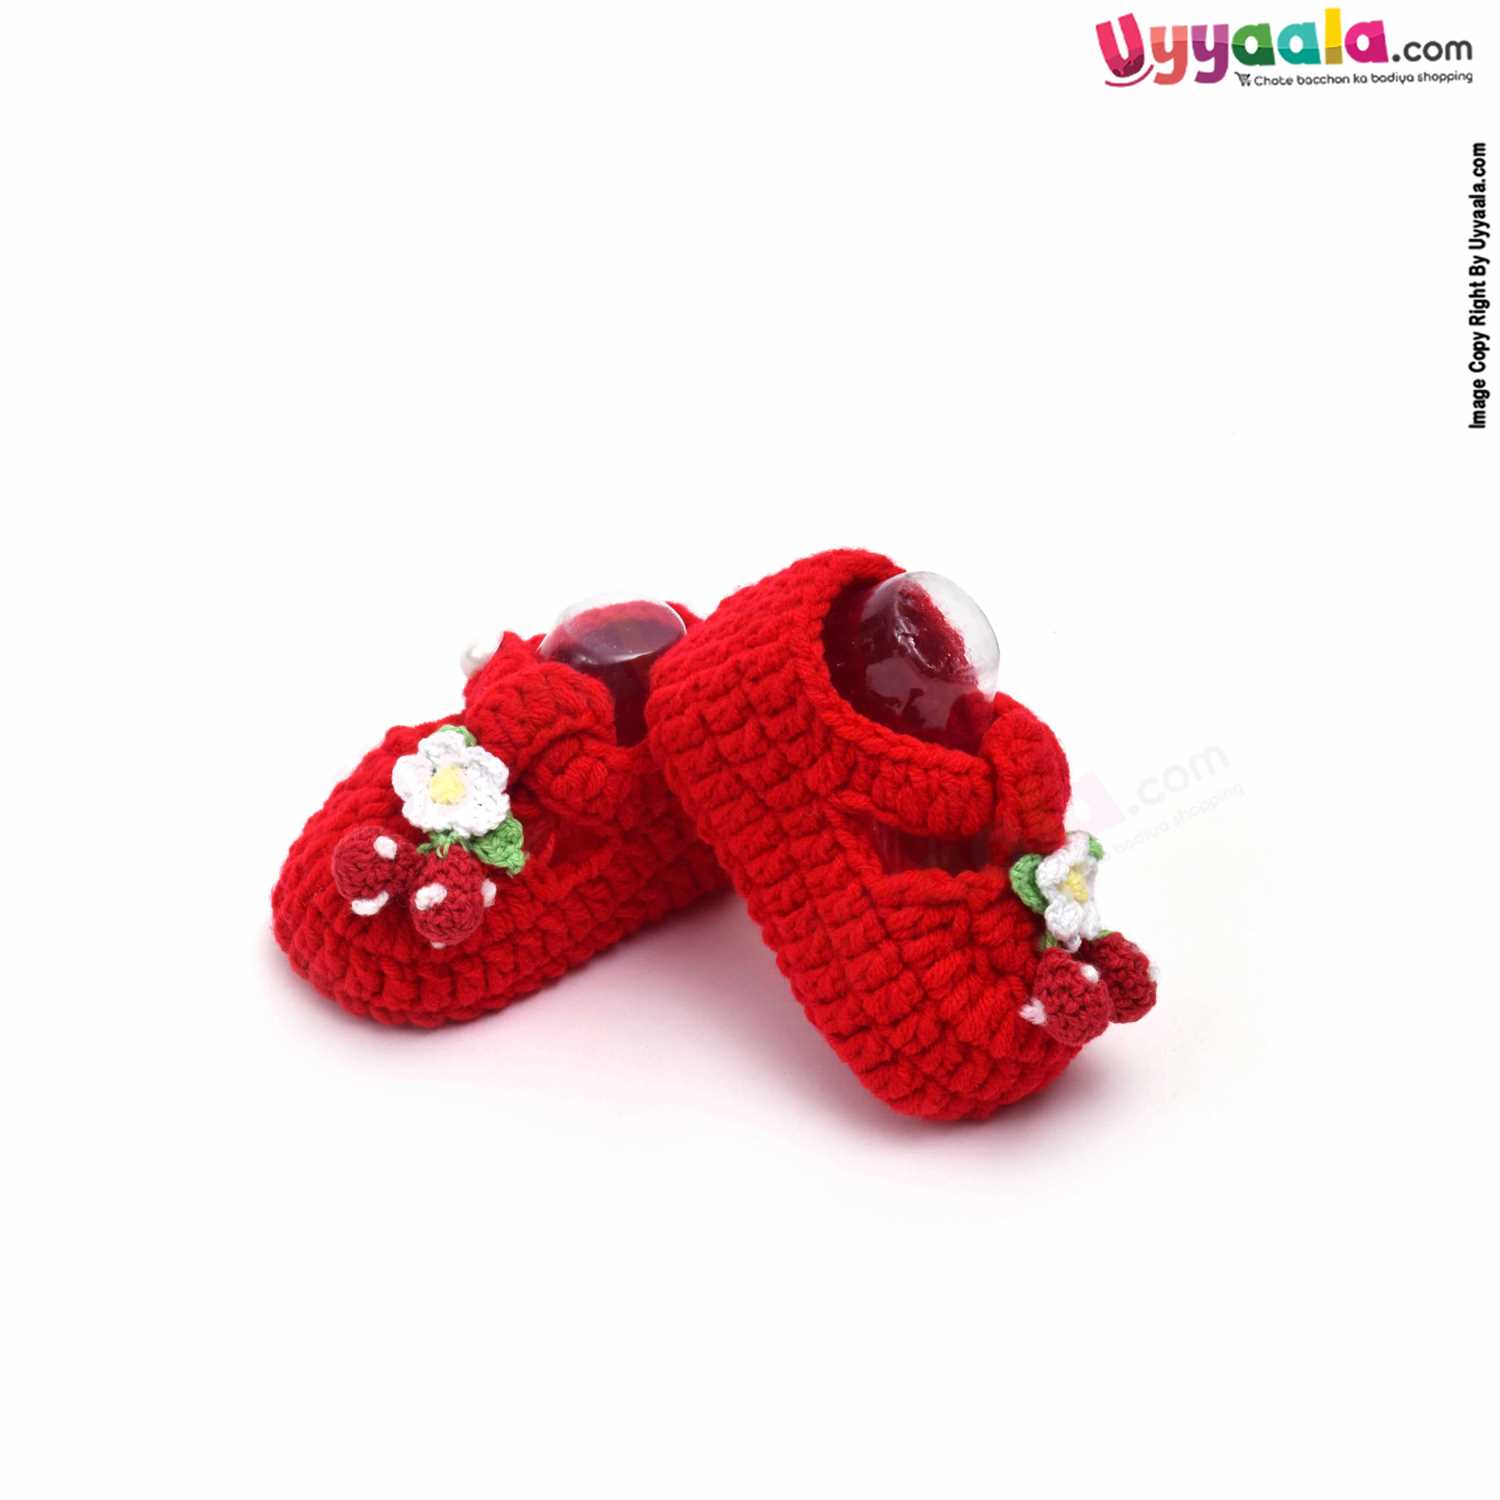 Woolen Hand Knitted Socks for New Born 0-6m Age - Red